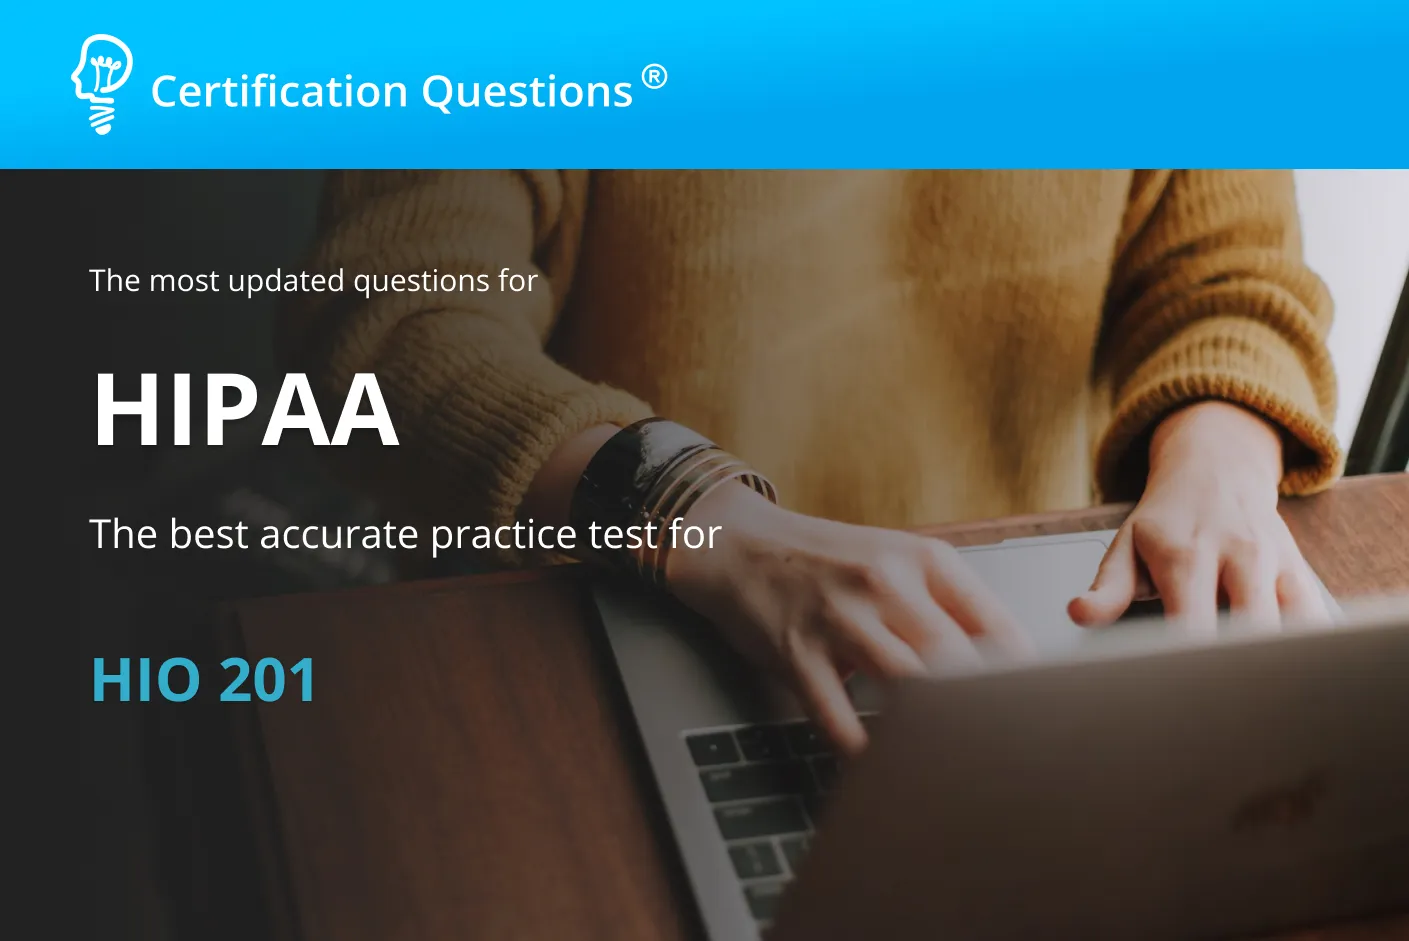 This image is related to the HIPAA Exam HIO 201 practice test in the United States of America.